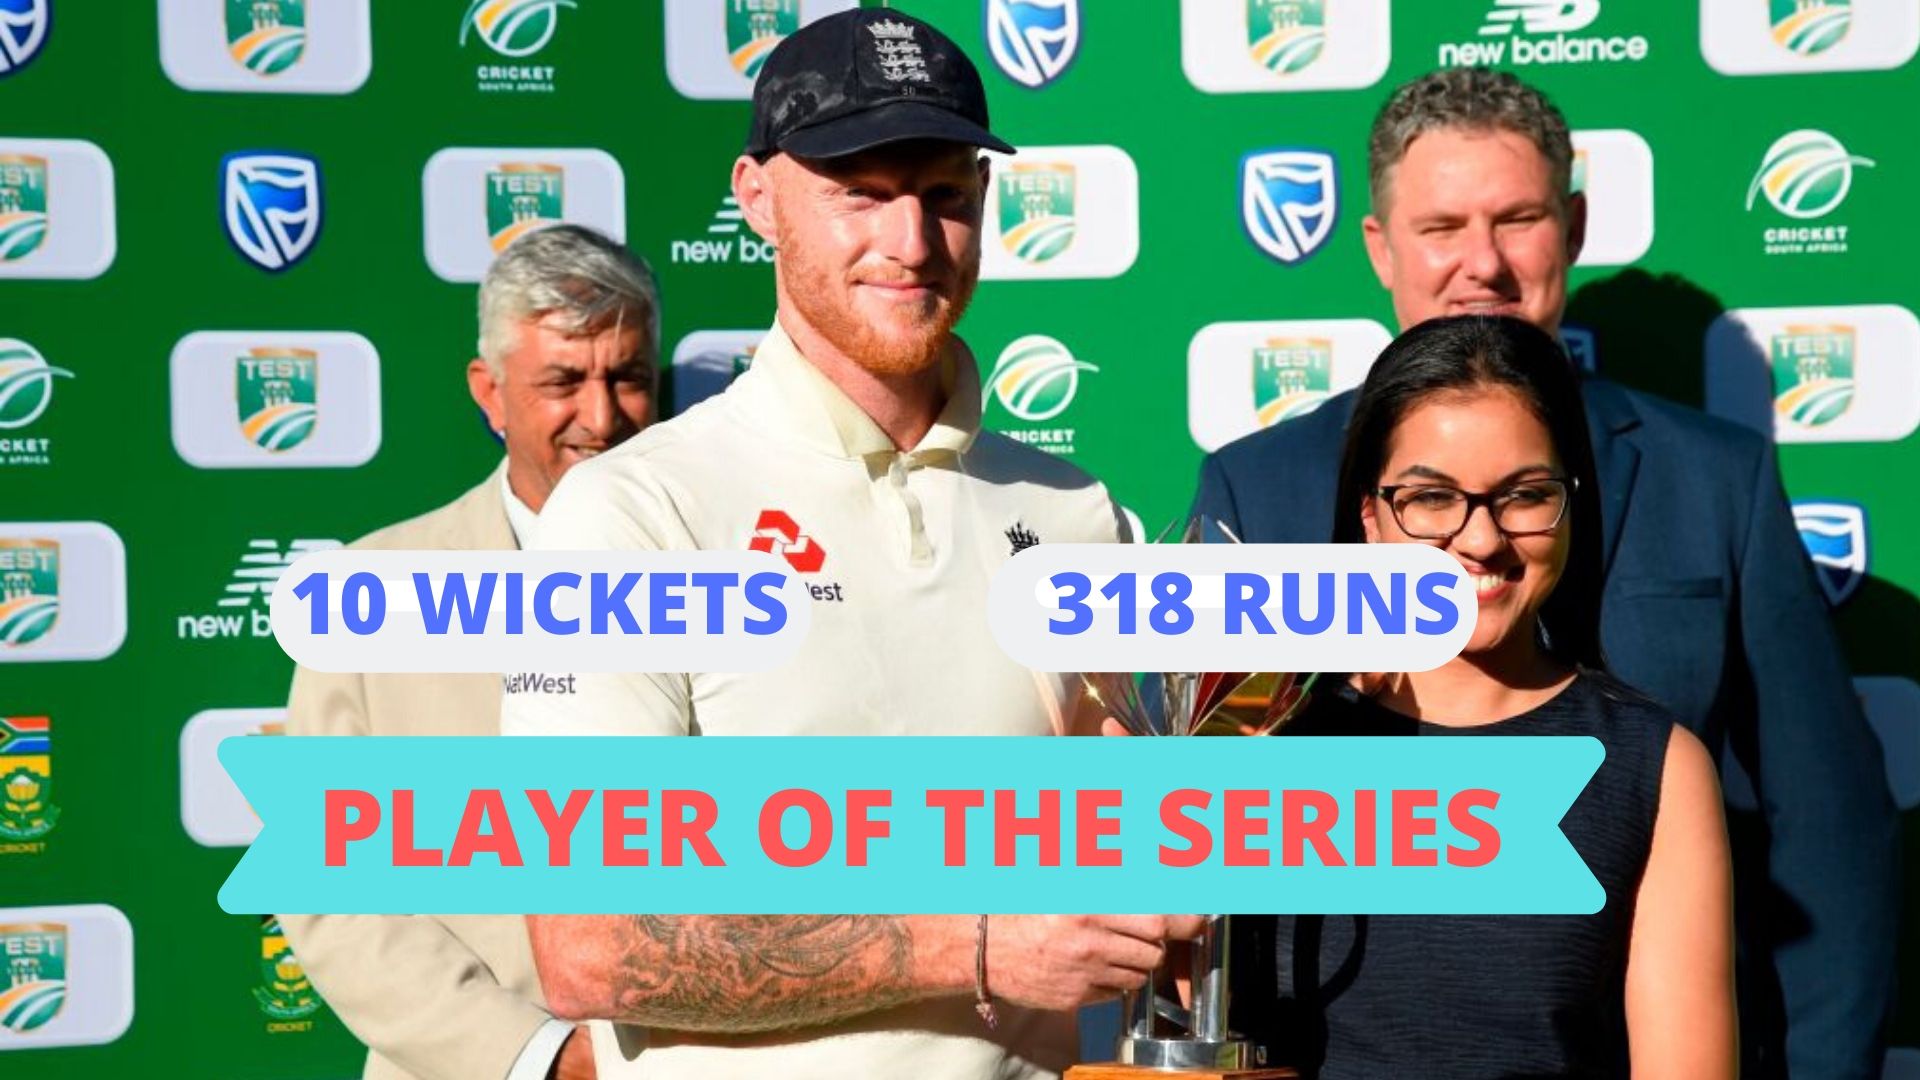 Ben Stokes has been conferred Player of the Series award.